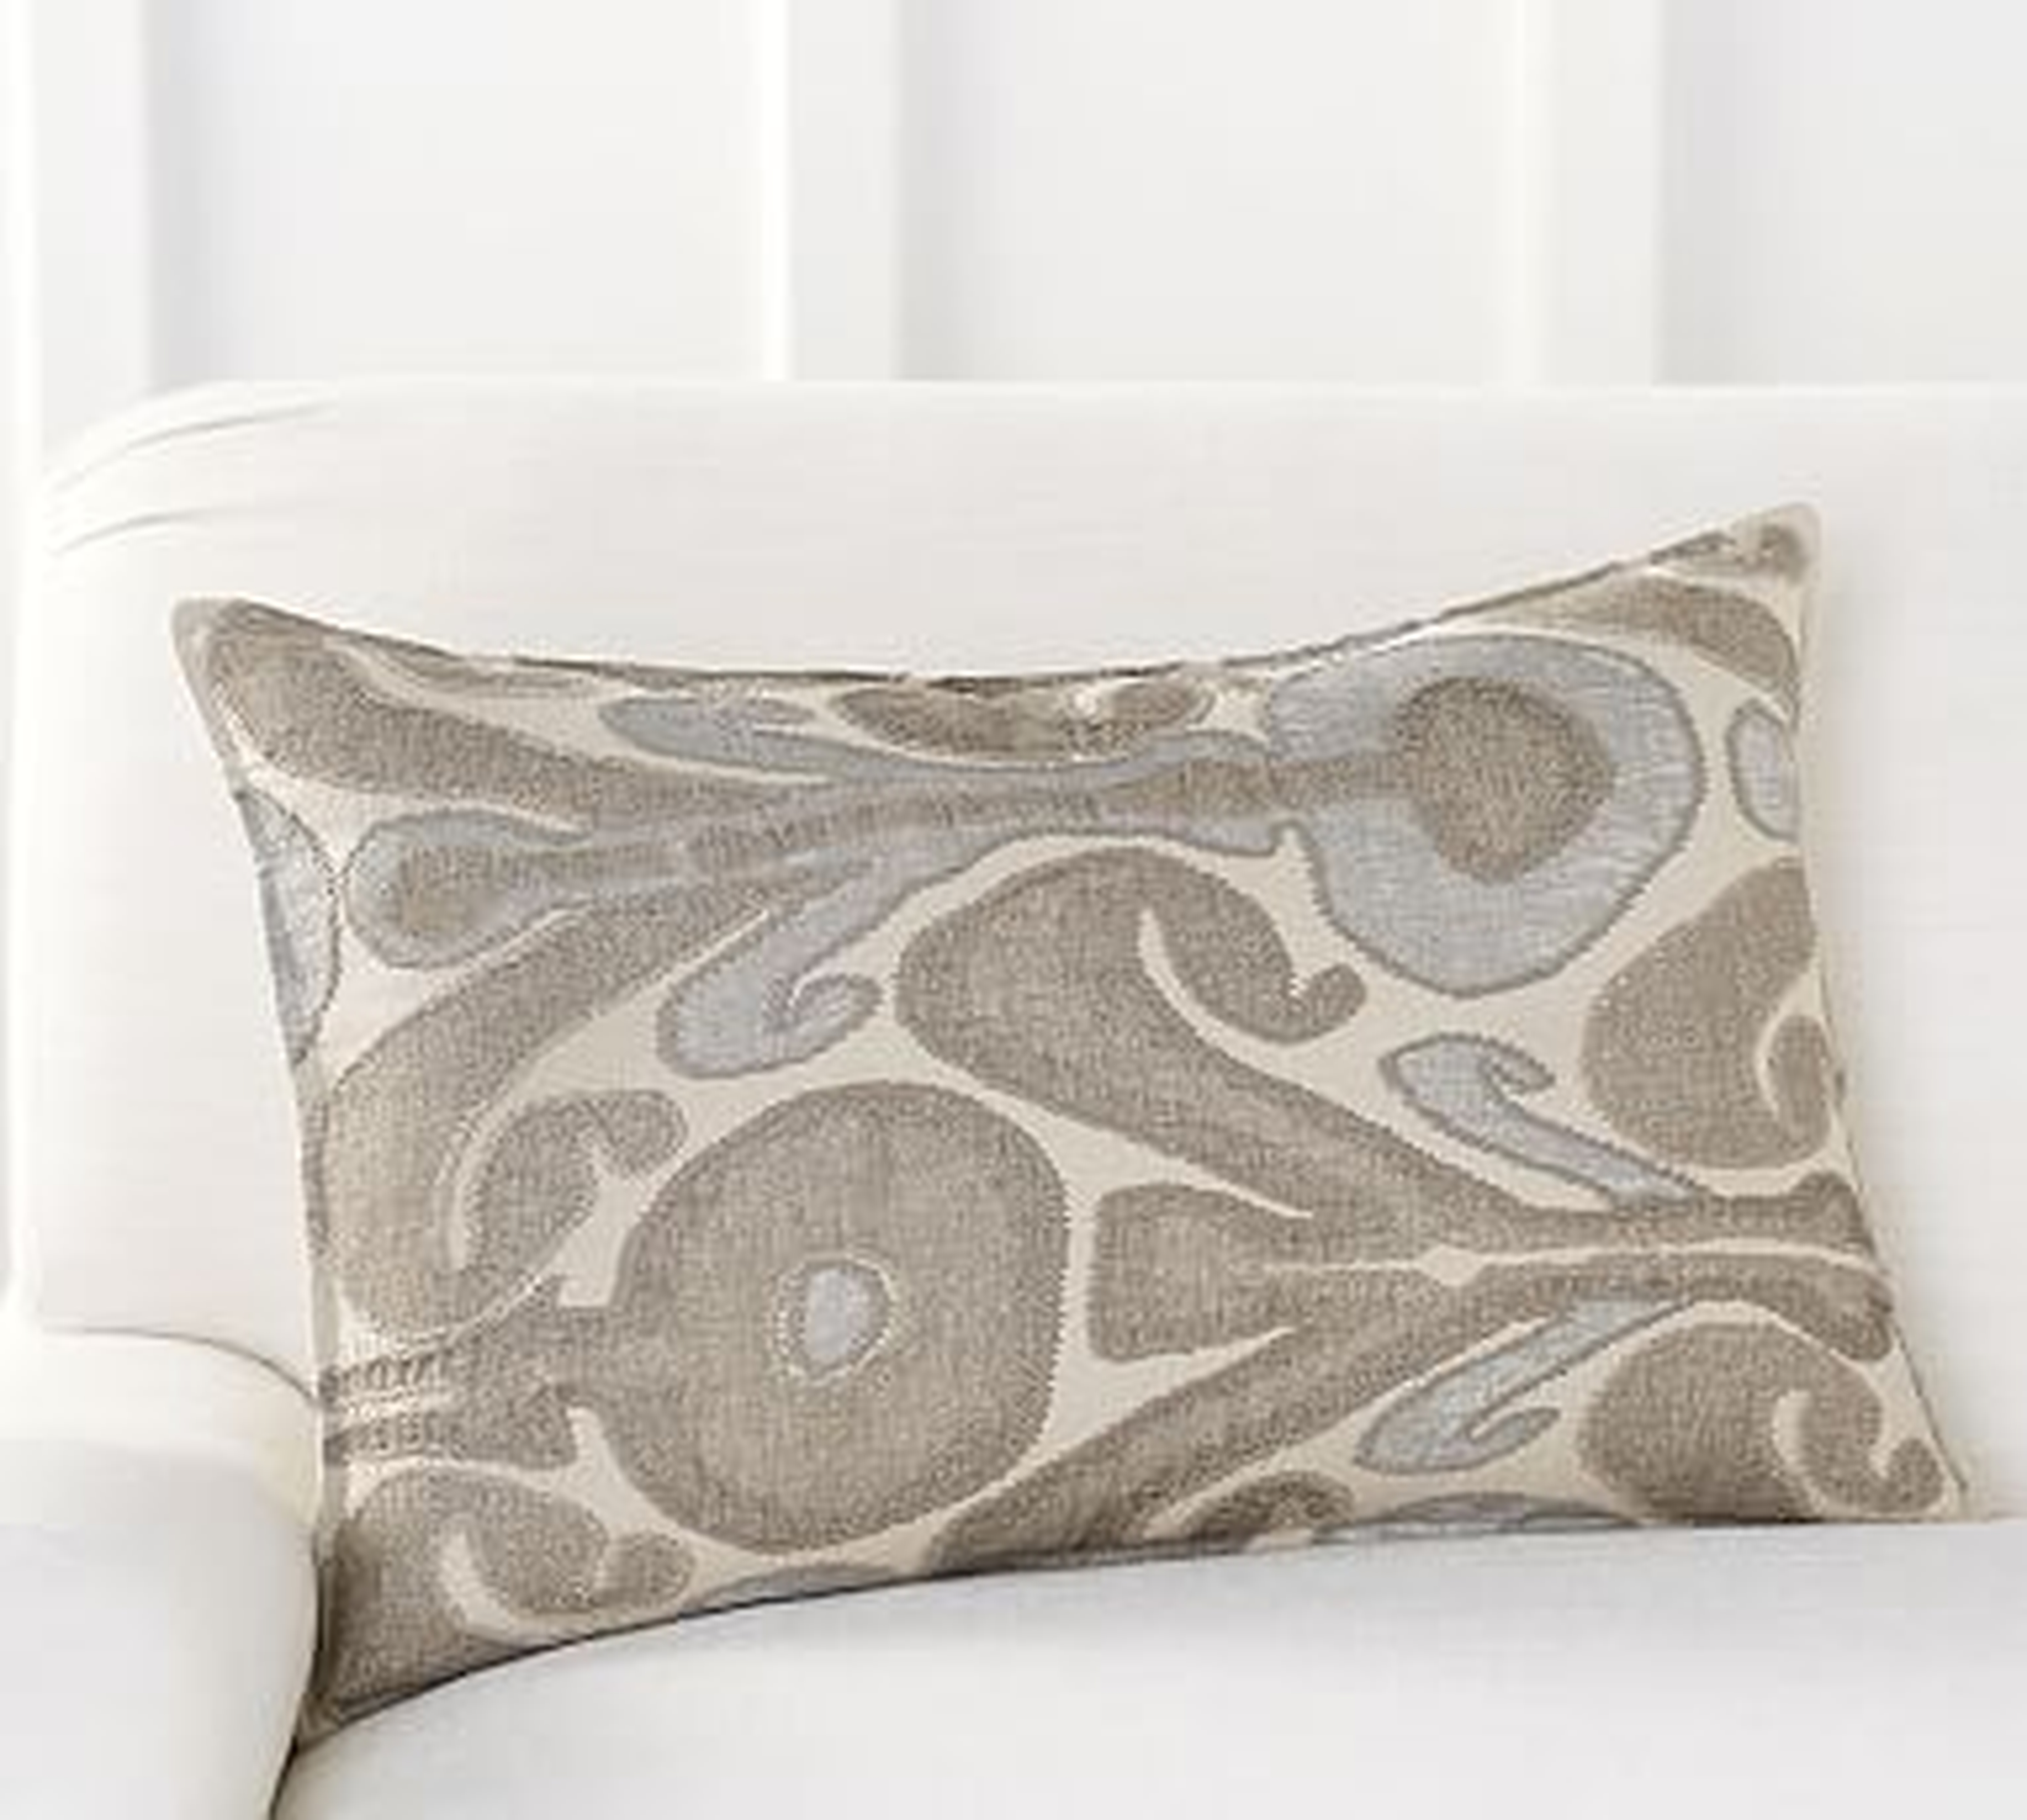 Kenmare Ikat Embroidered Lumbar Pillow Cover, 16 x 26", Neutral Multi - Pottery Barn